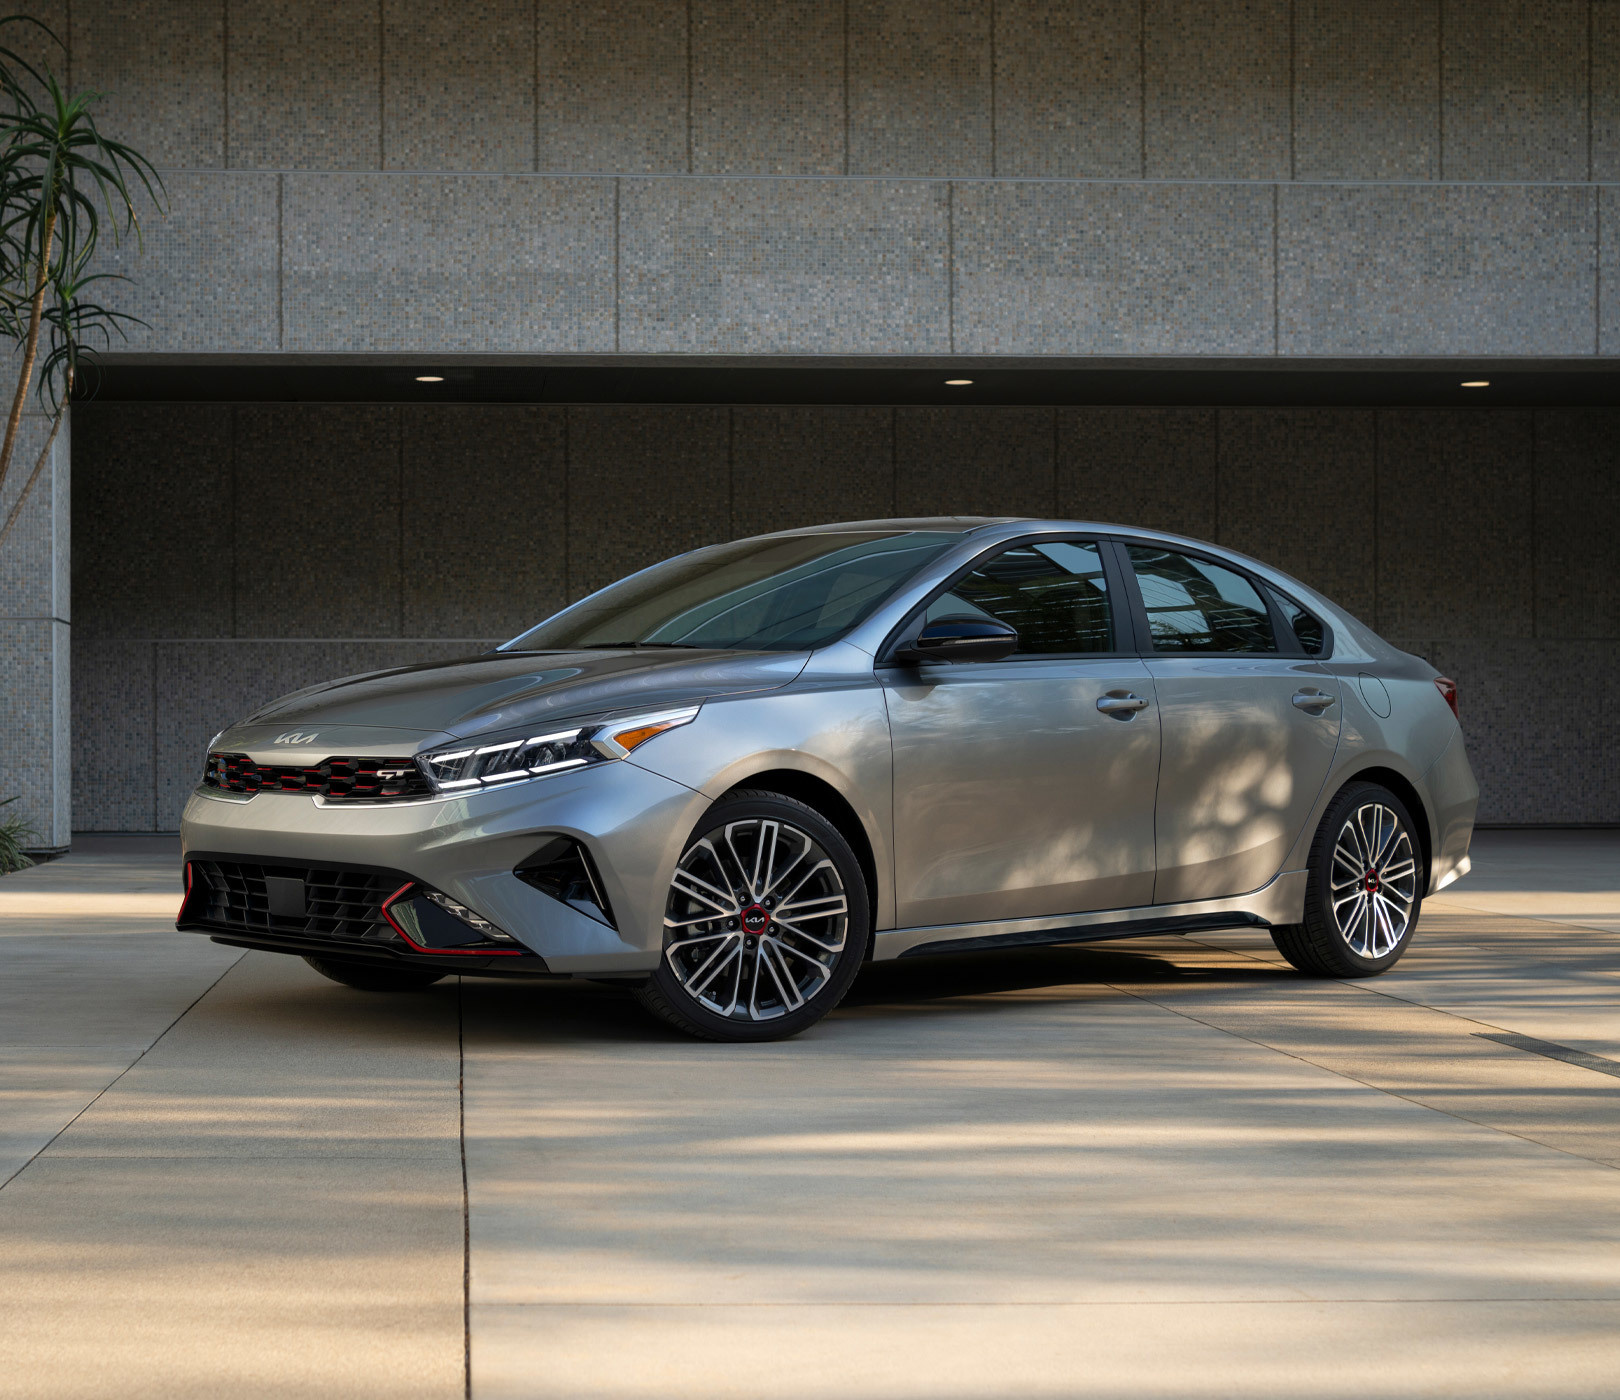 2023 Kia Forte With A Sleek Design Parked In Front Of A Garage - Three-Quarter View